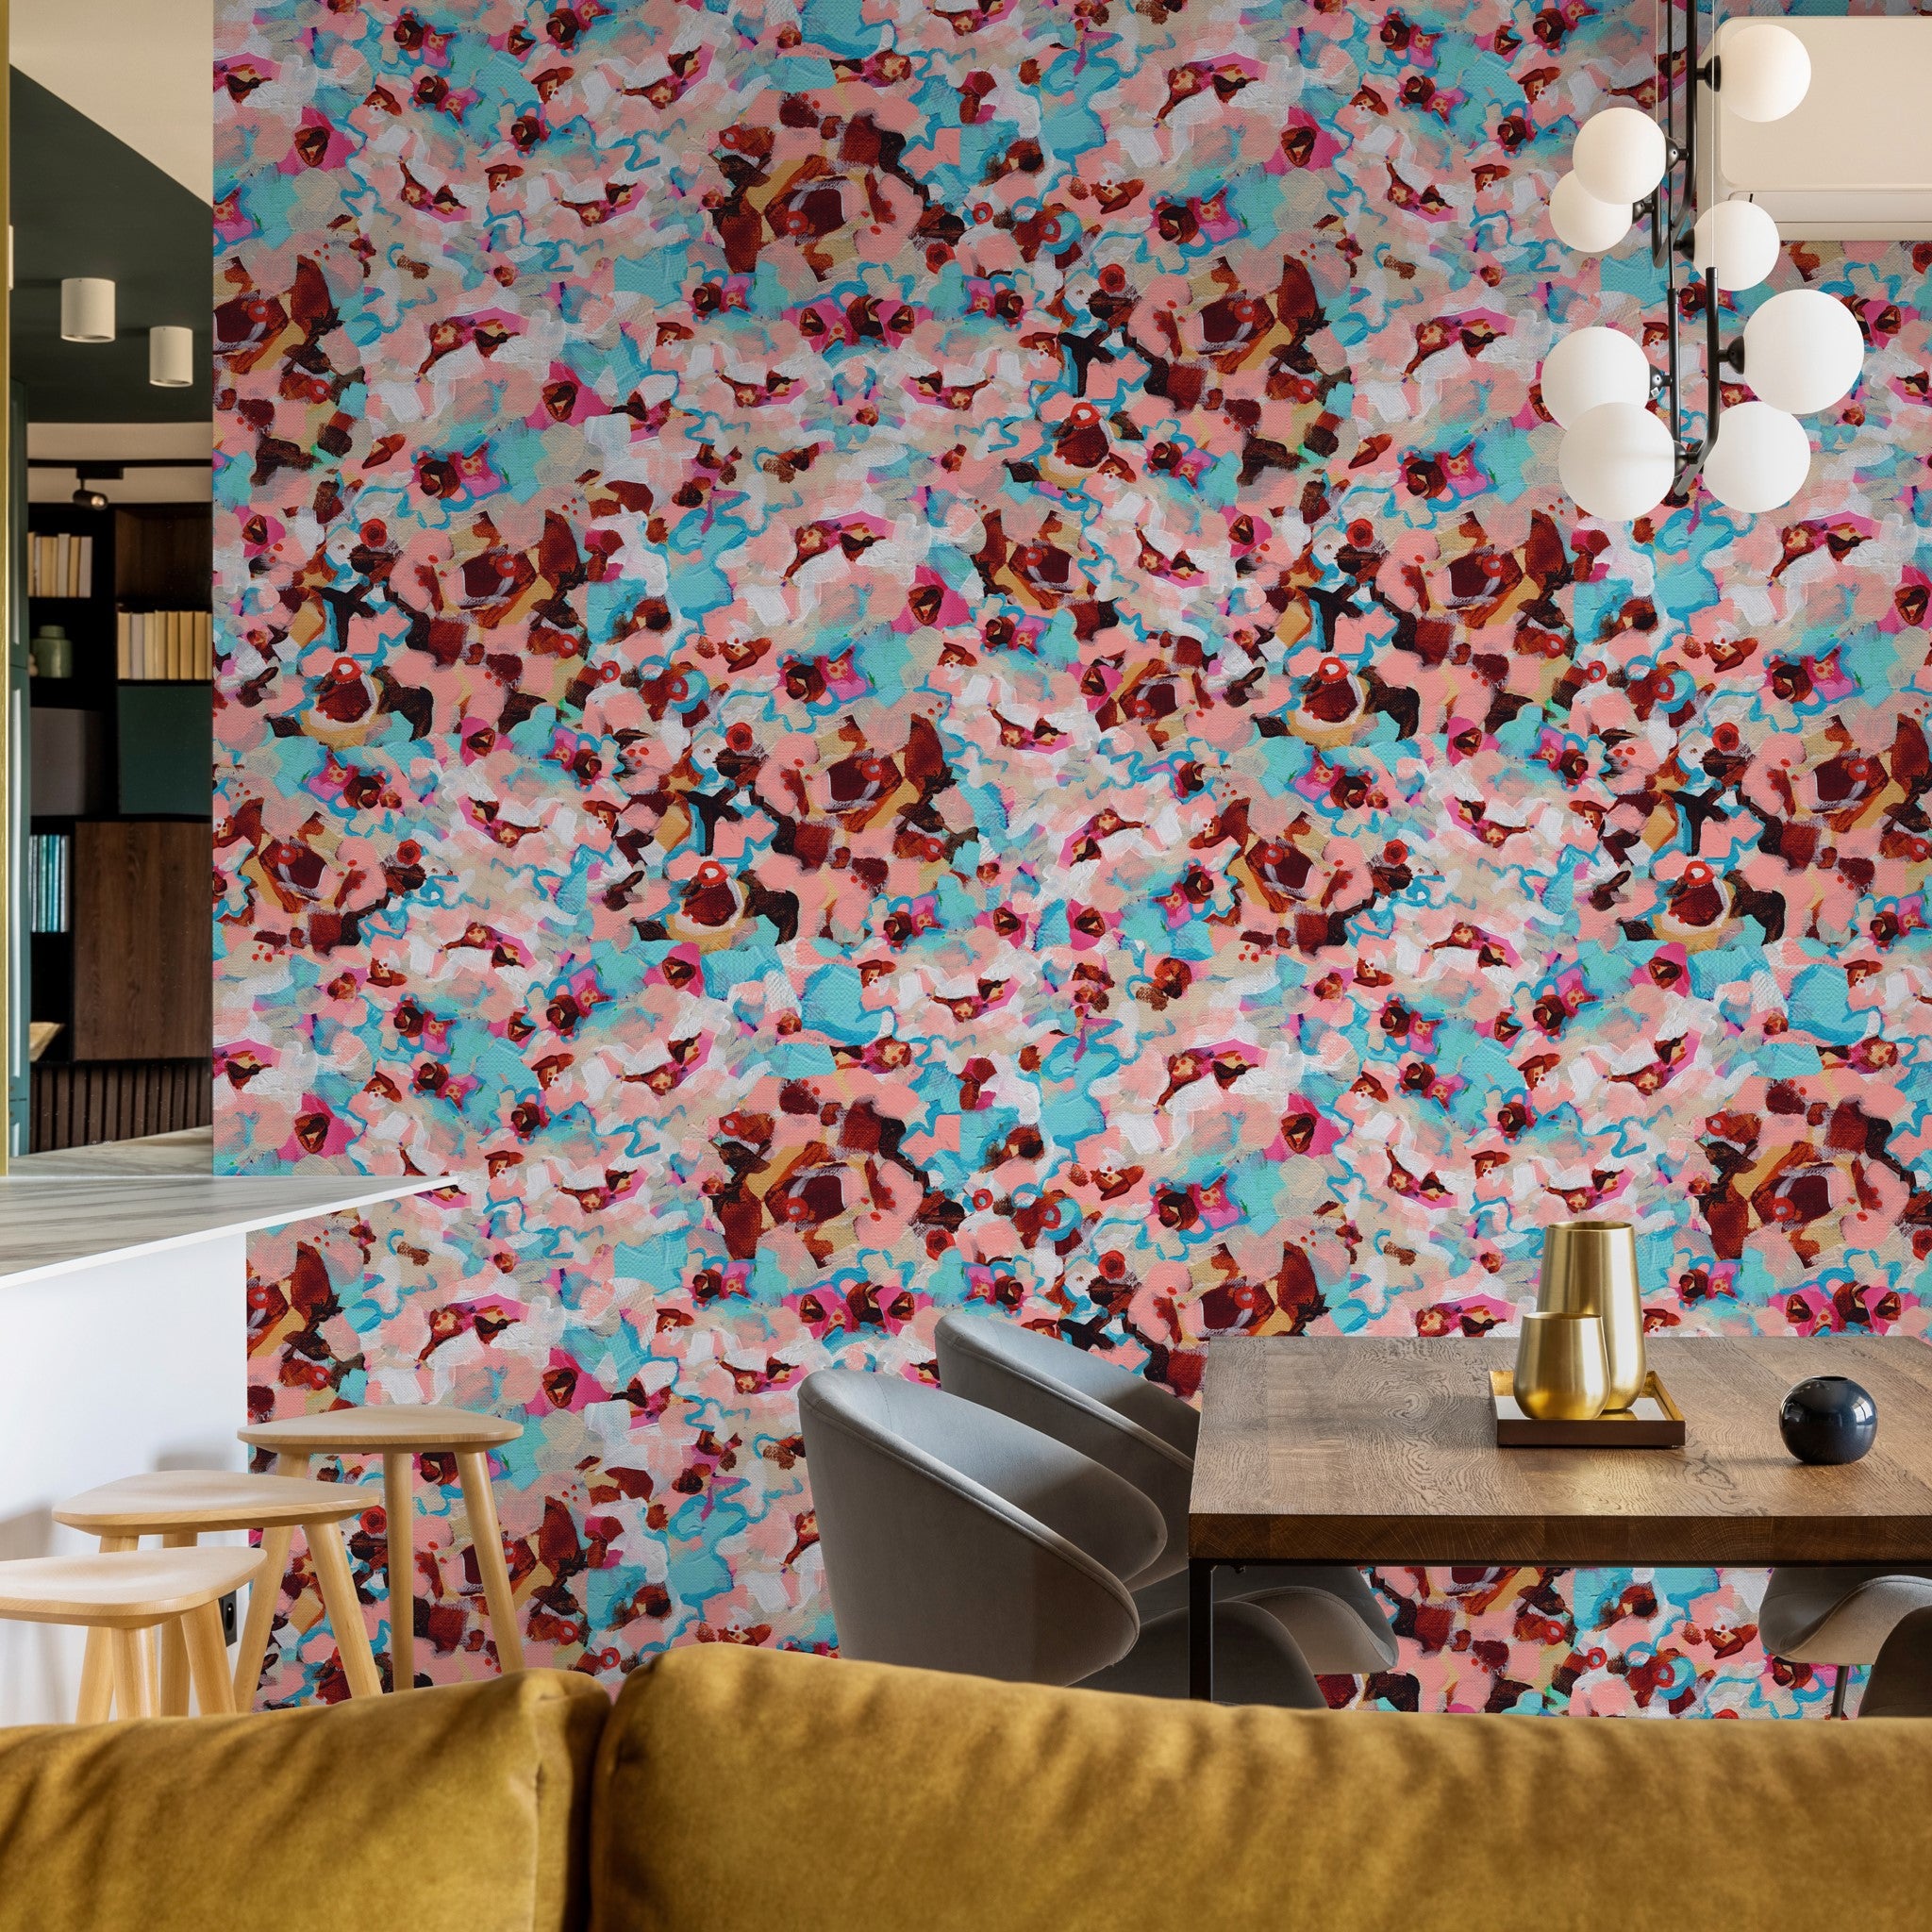 El Palo Wallpaper by Wall Blush featured in modern dining room, vibrant abstract design focus.